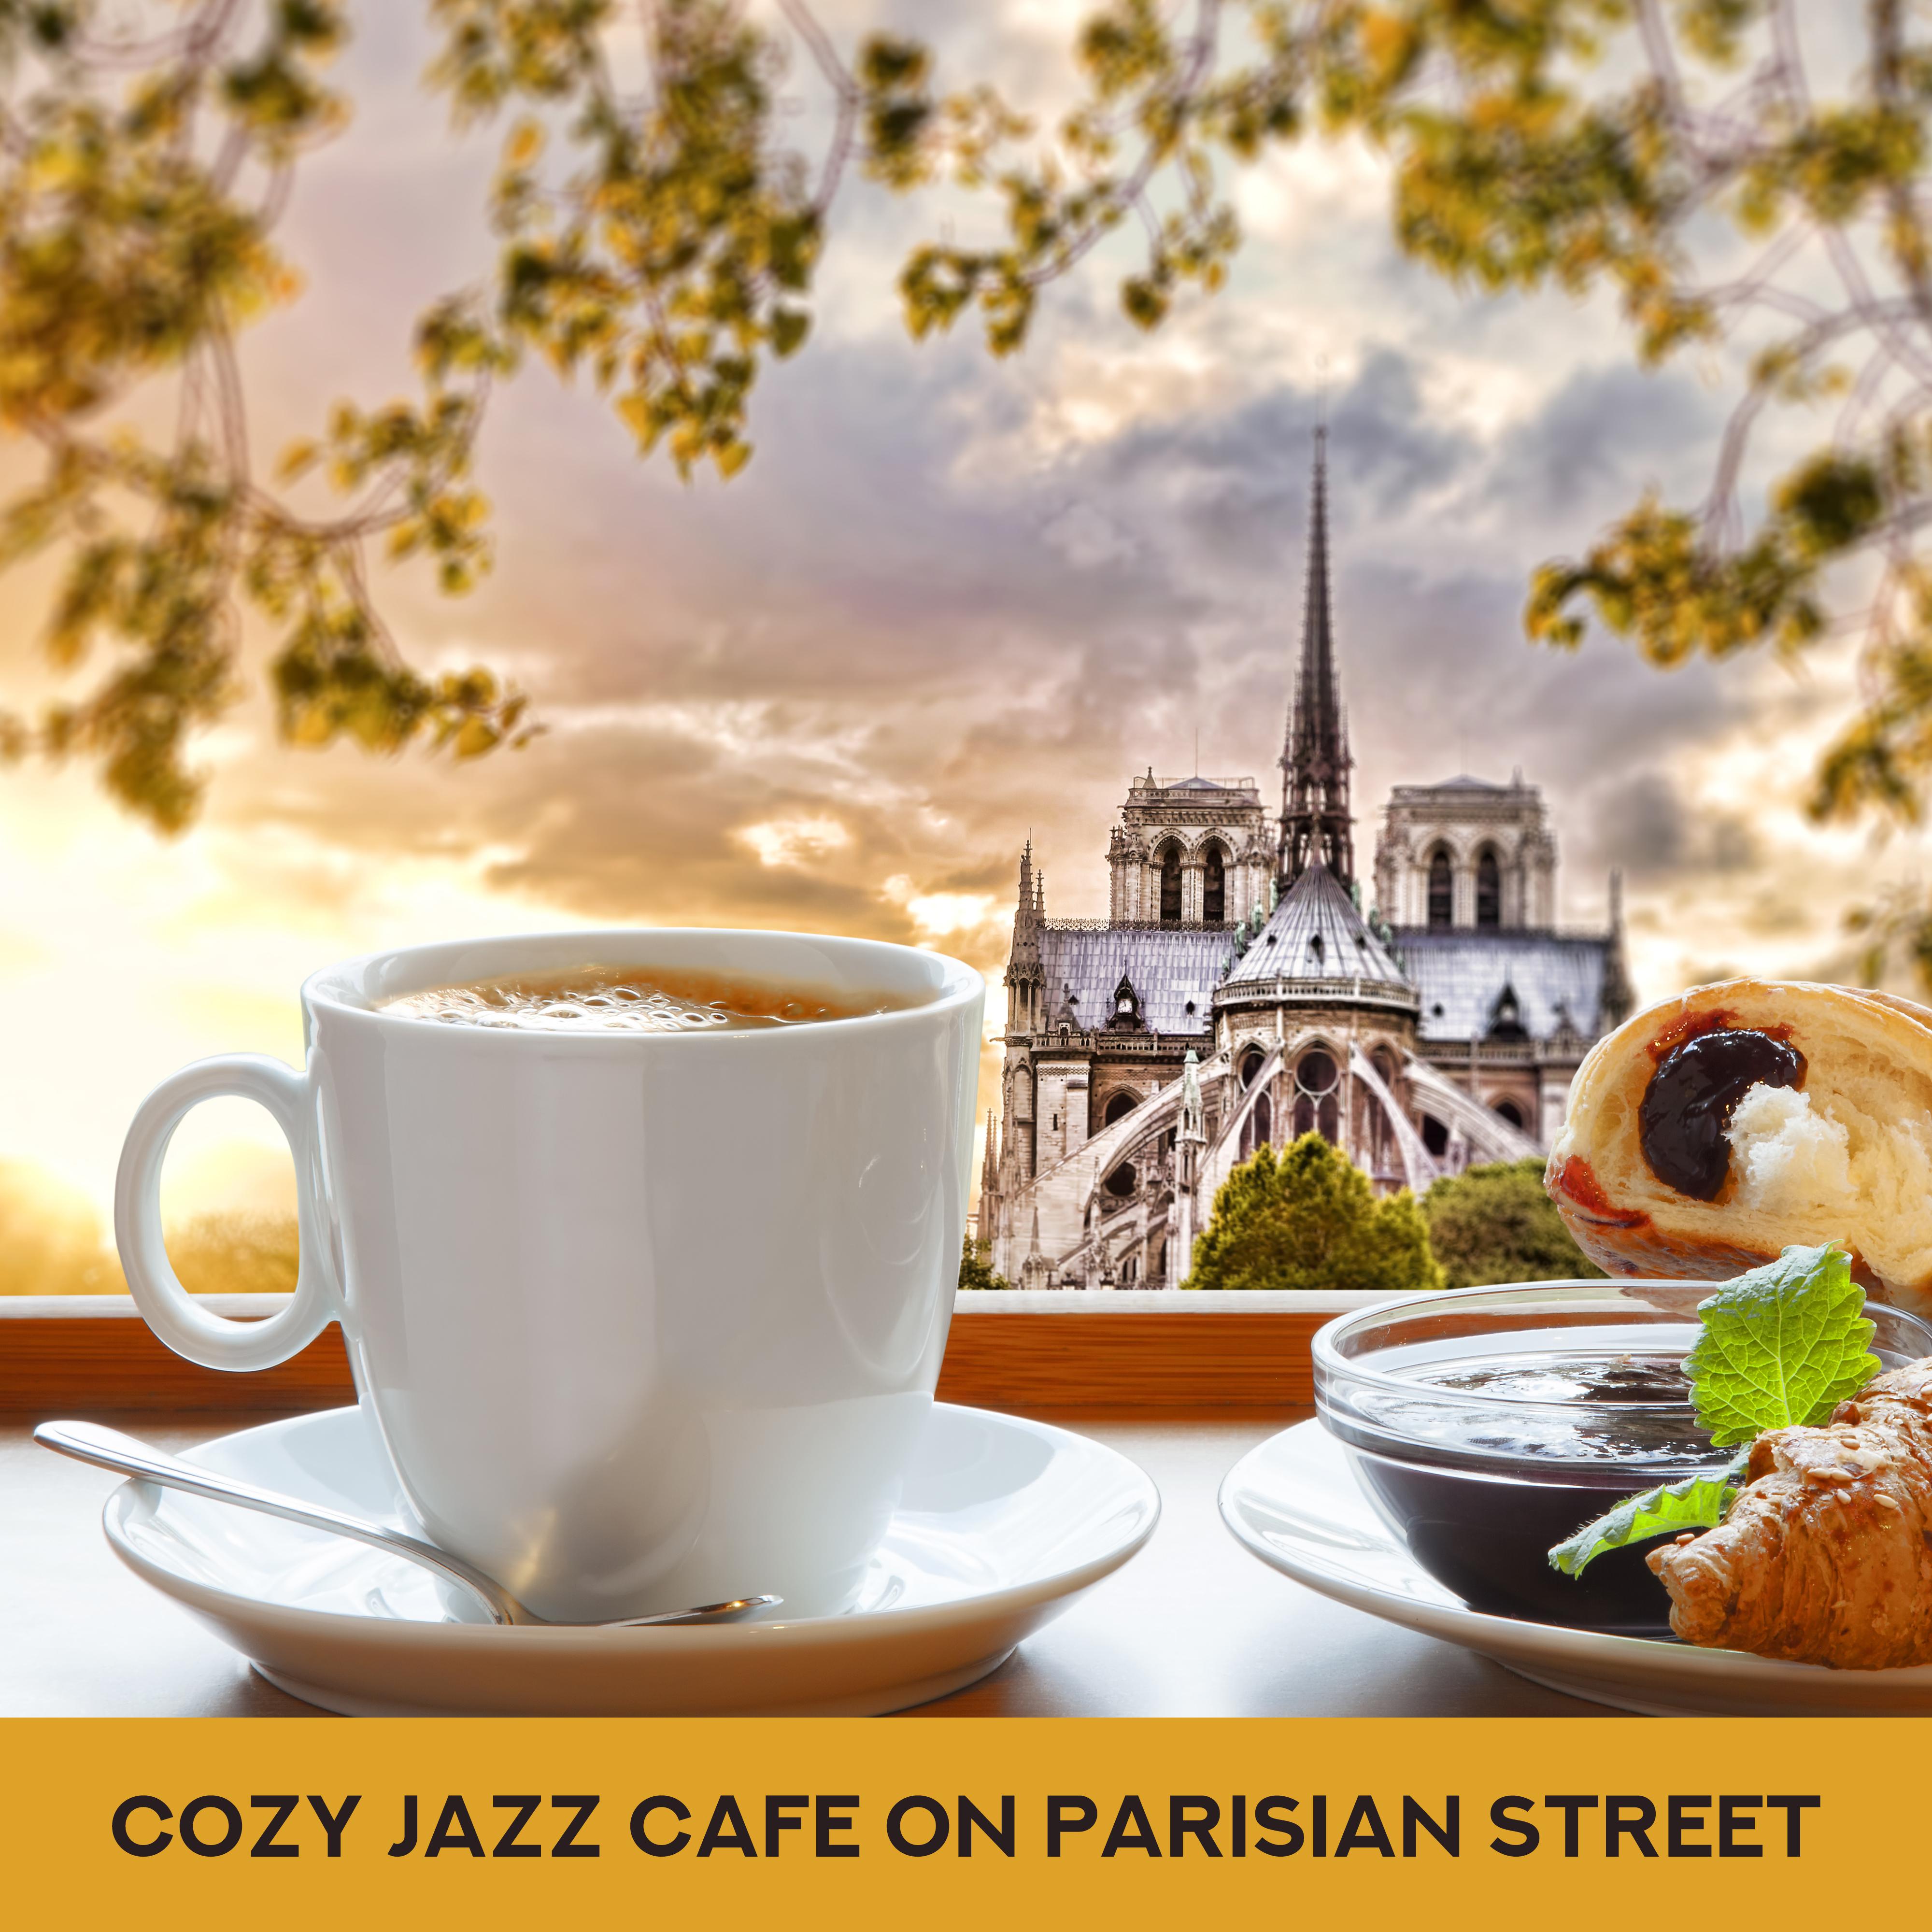 Cozy Jazz Cafe on Parisian Street: 15 Smooth Instrumental Jazz Songs for Nice Time Spending with Coffee, Book & Friends